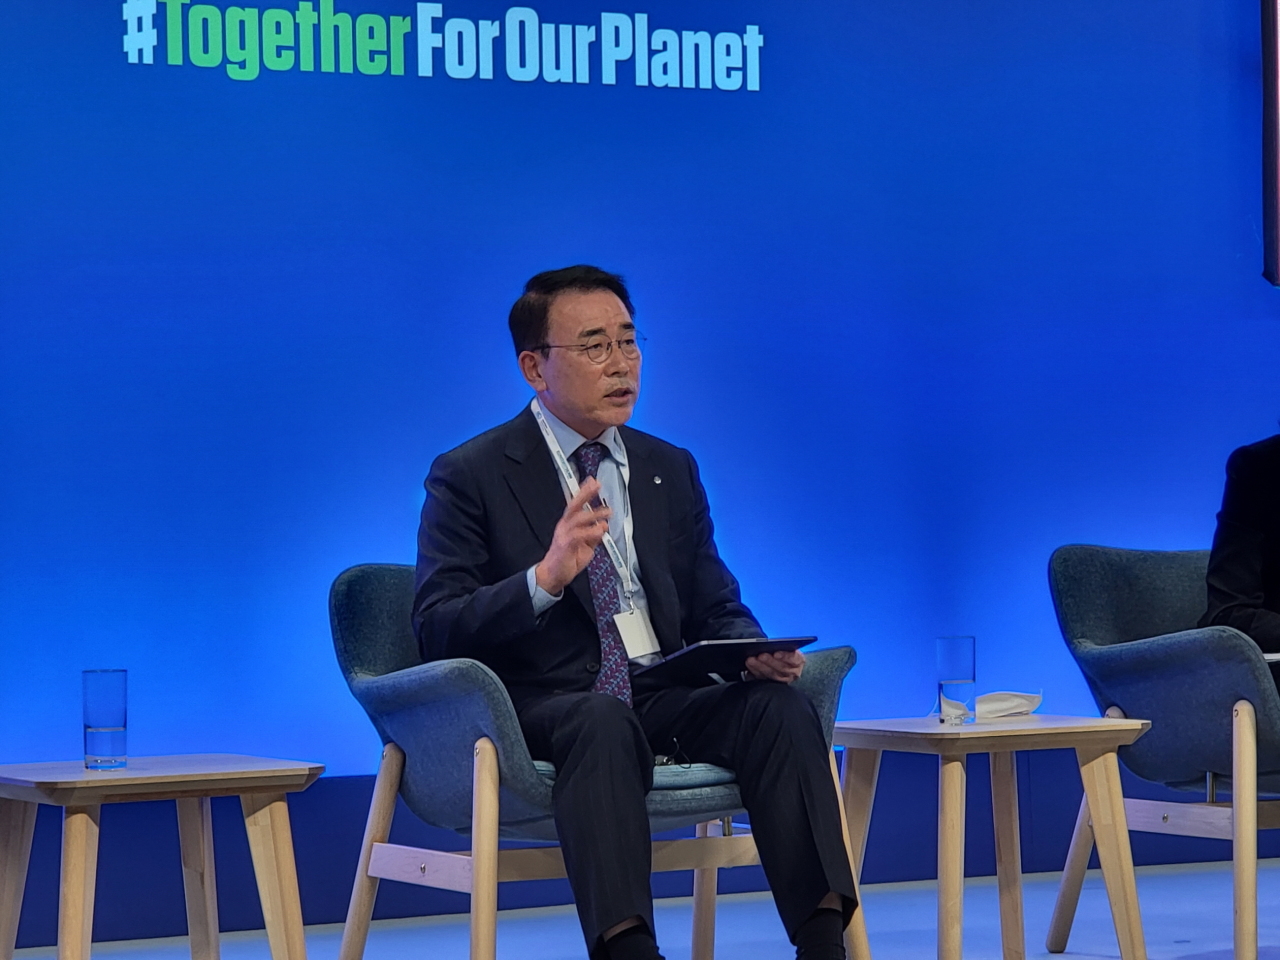 Shinhan Financial Group Chairman Cho Yong-byoung speaks at the COP26 climate summit held in Glasgow on Oct. 9, 2021. (Shinhan Financial Group)